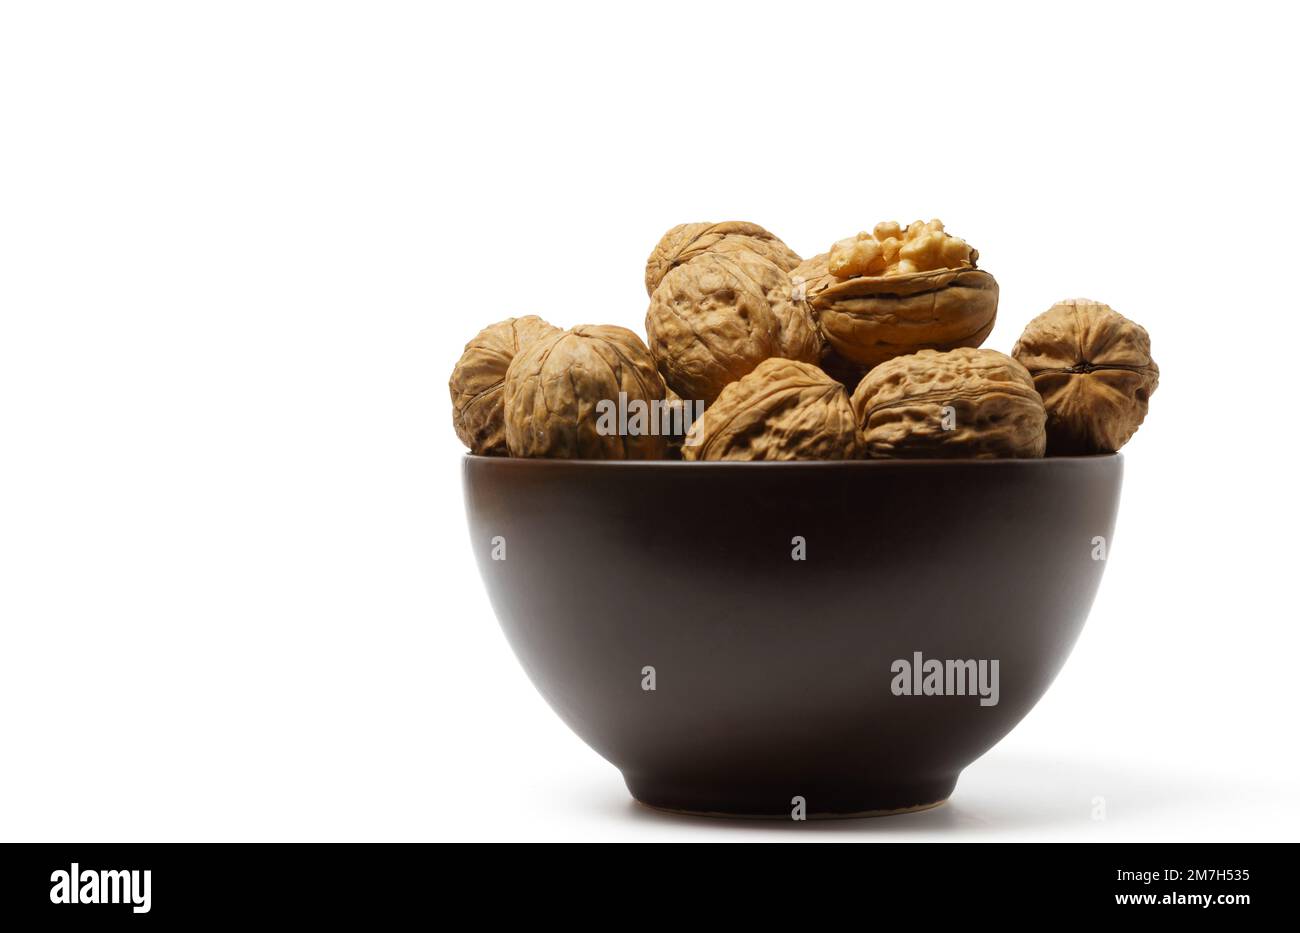 walnuts in a brown bowl Stock Photo